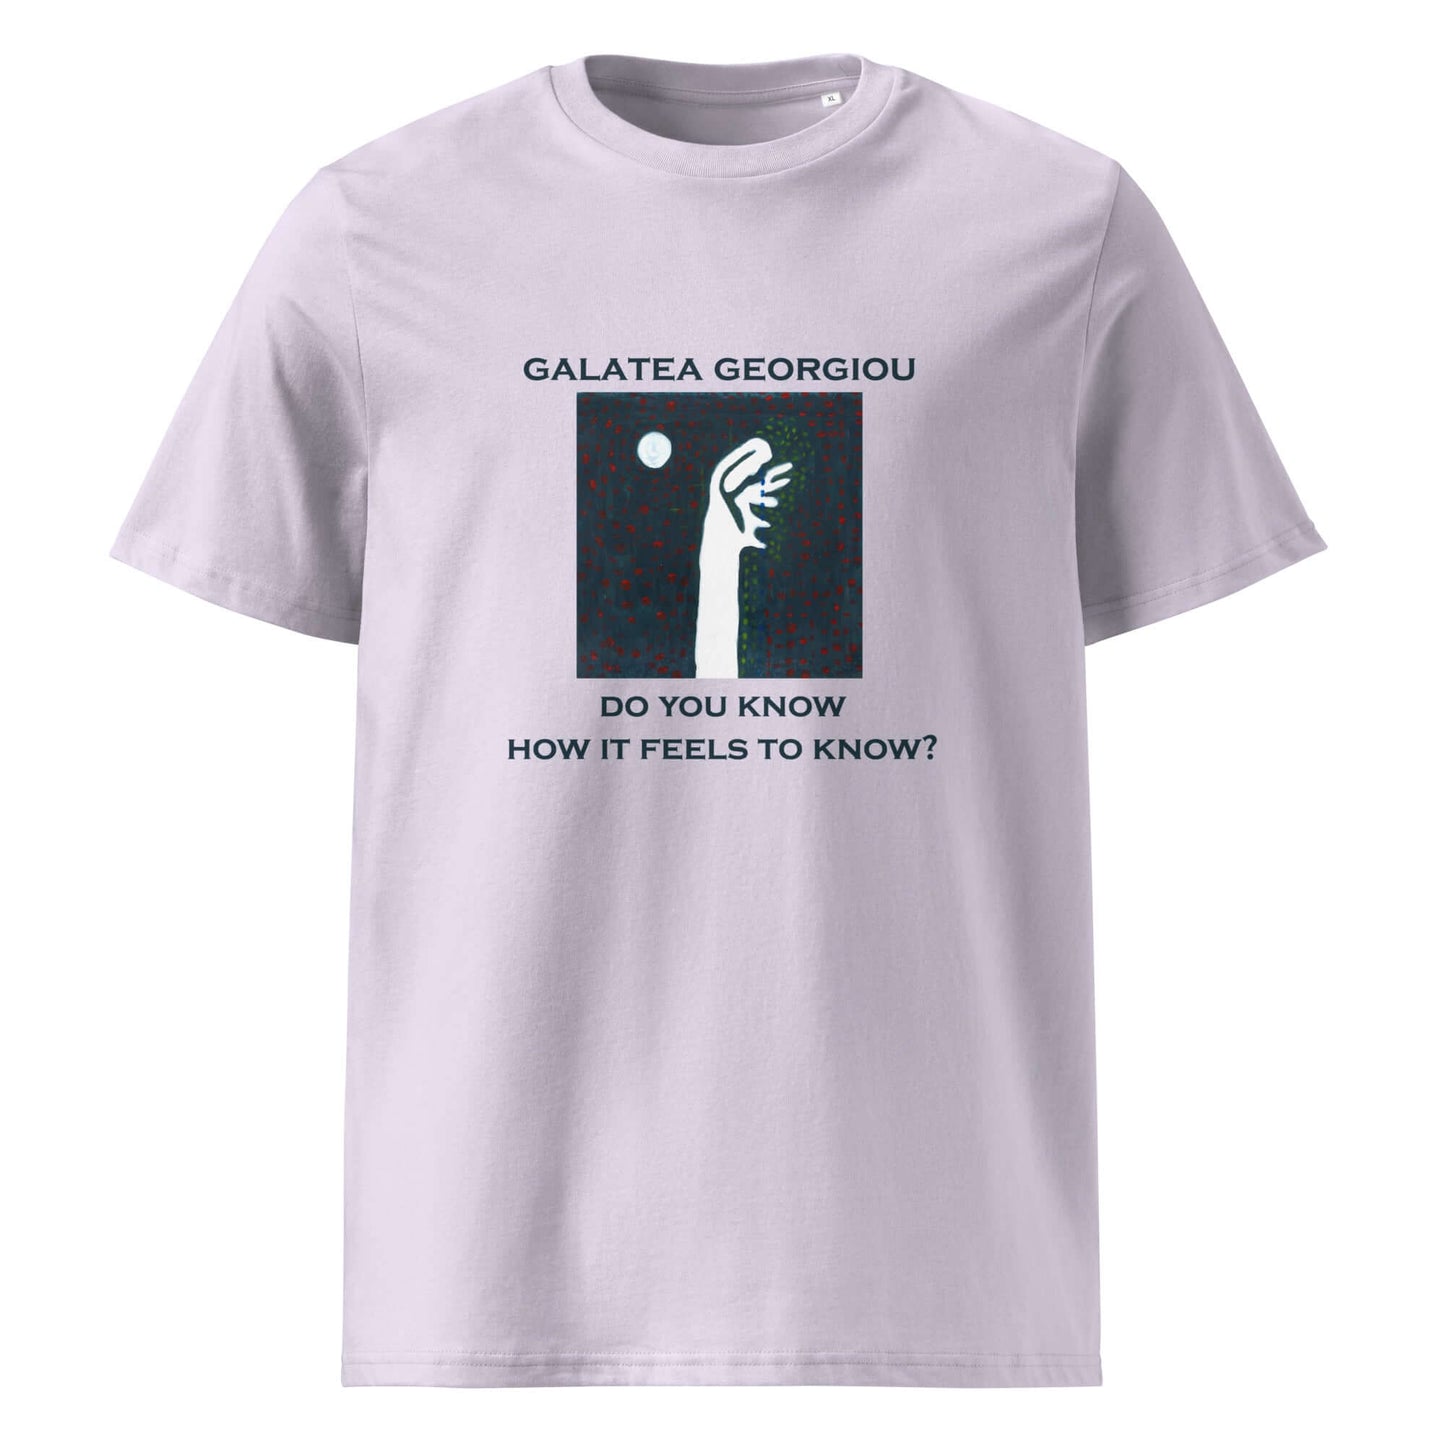 How it Feels to Know - Unisex organic cotton t-shirt